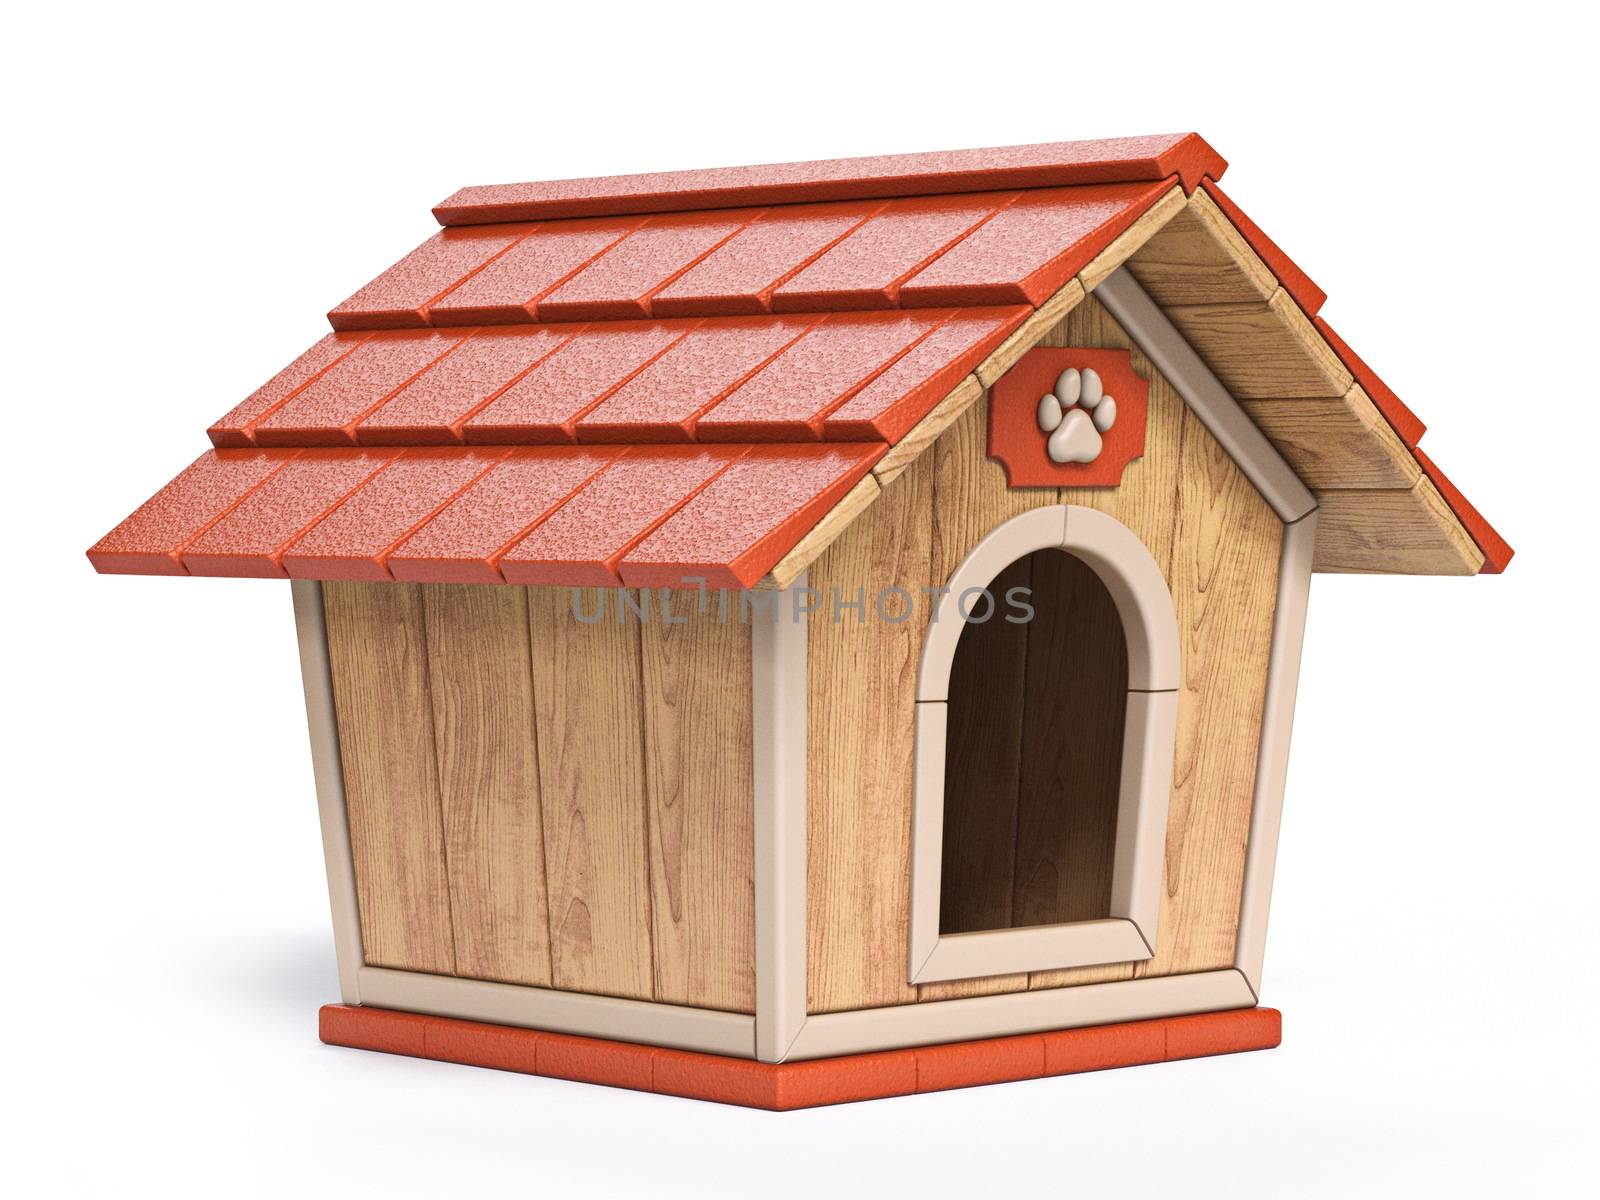 Wooden dog house Side view 3D render illustration isolated on white background